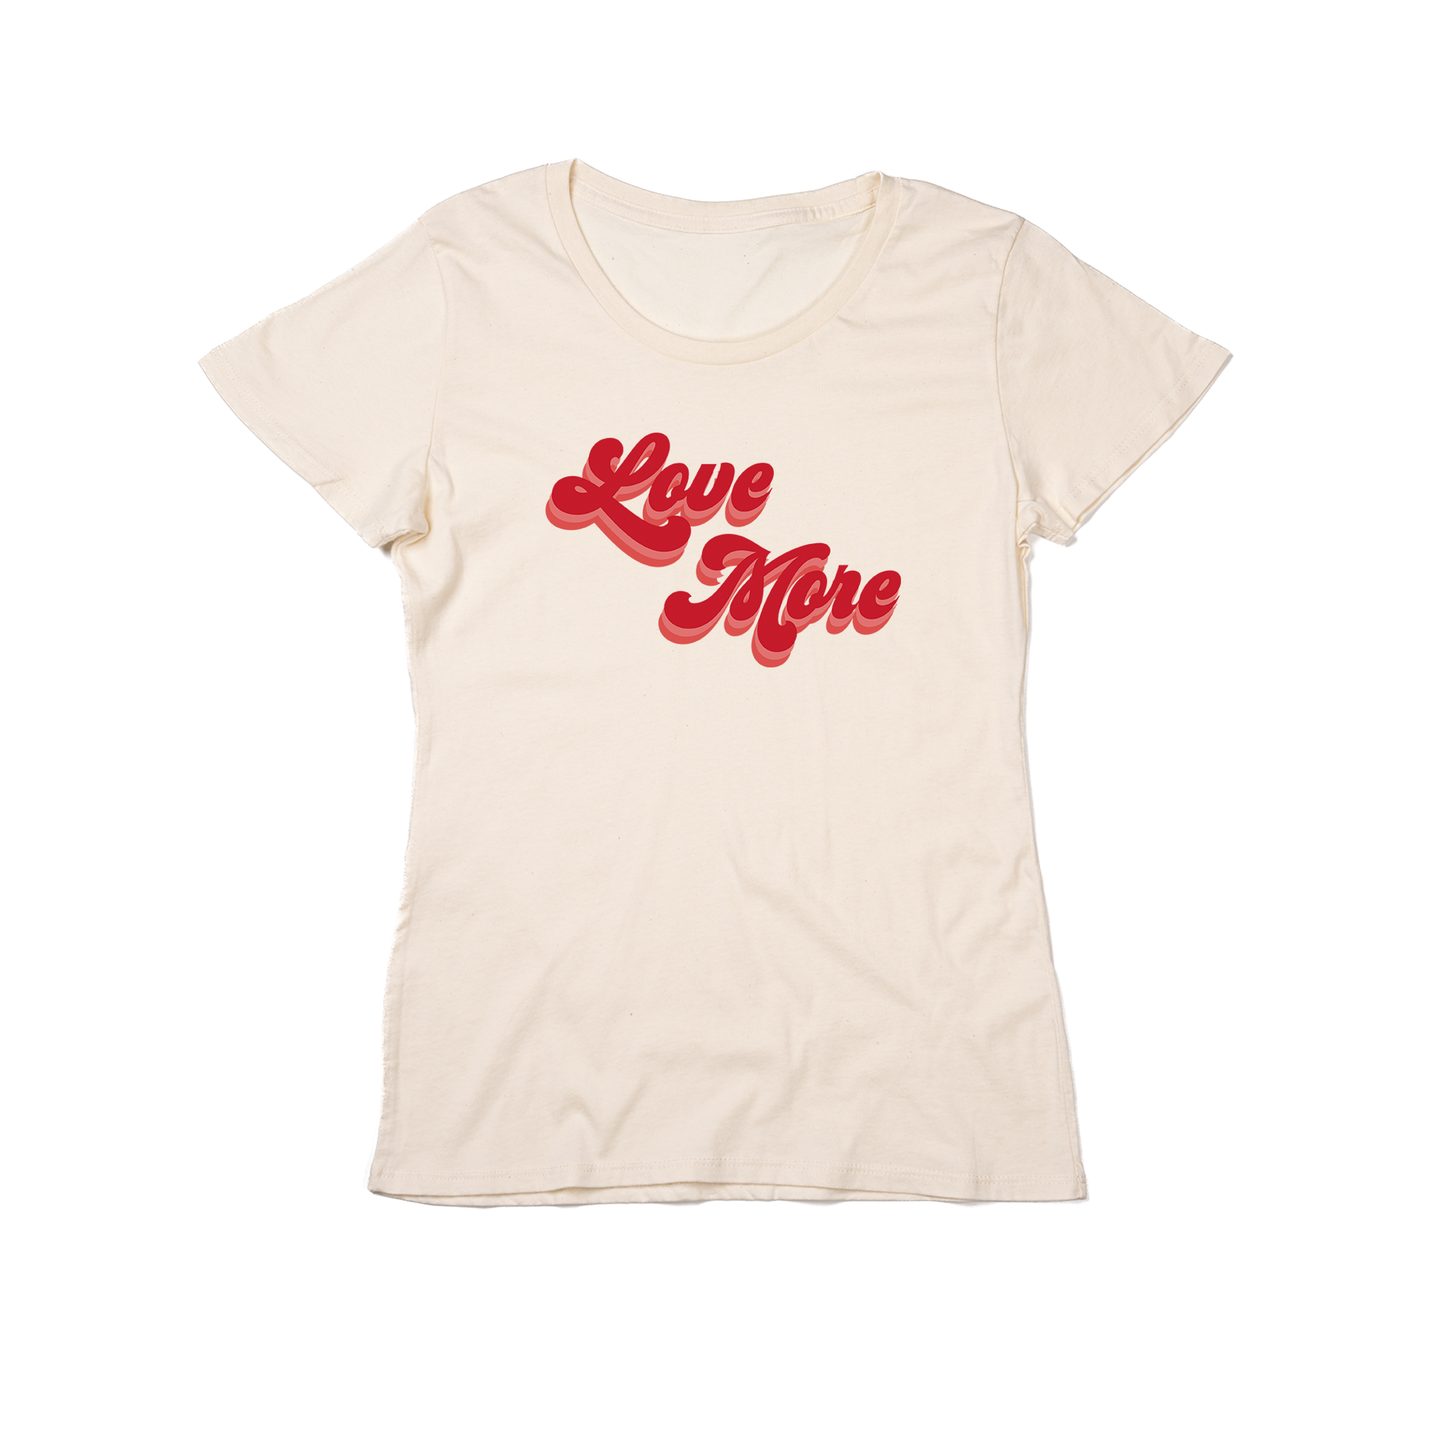 Love More (Retro, Across Front) - Women's Fitted Tee (Natural)